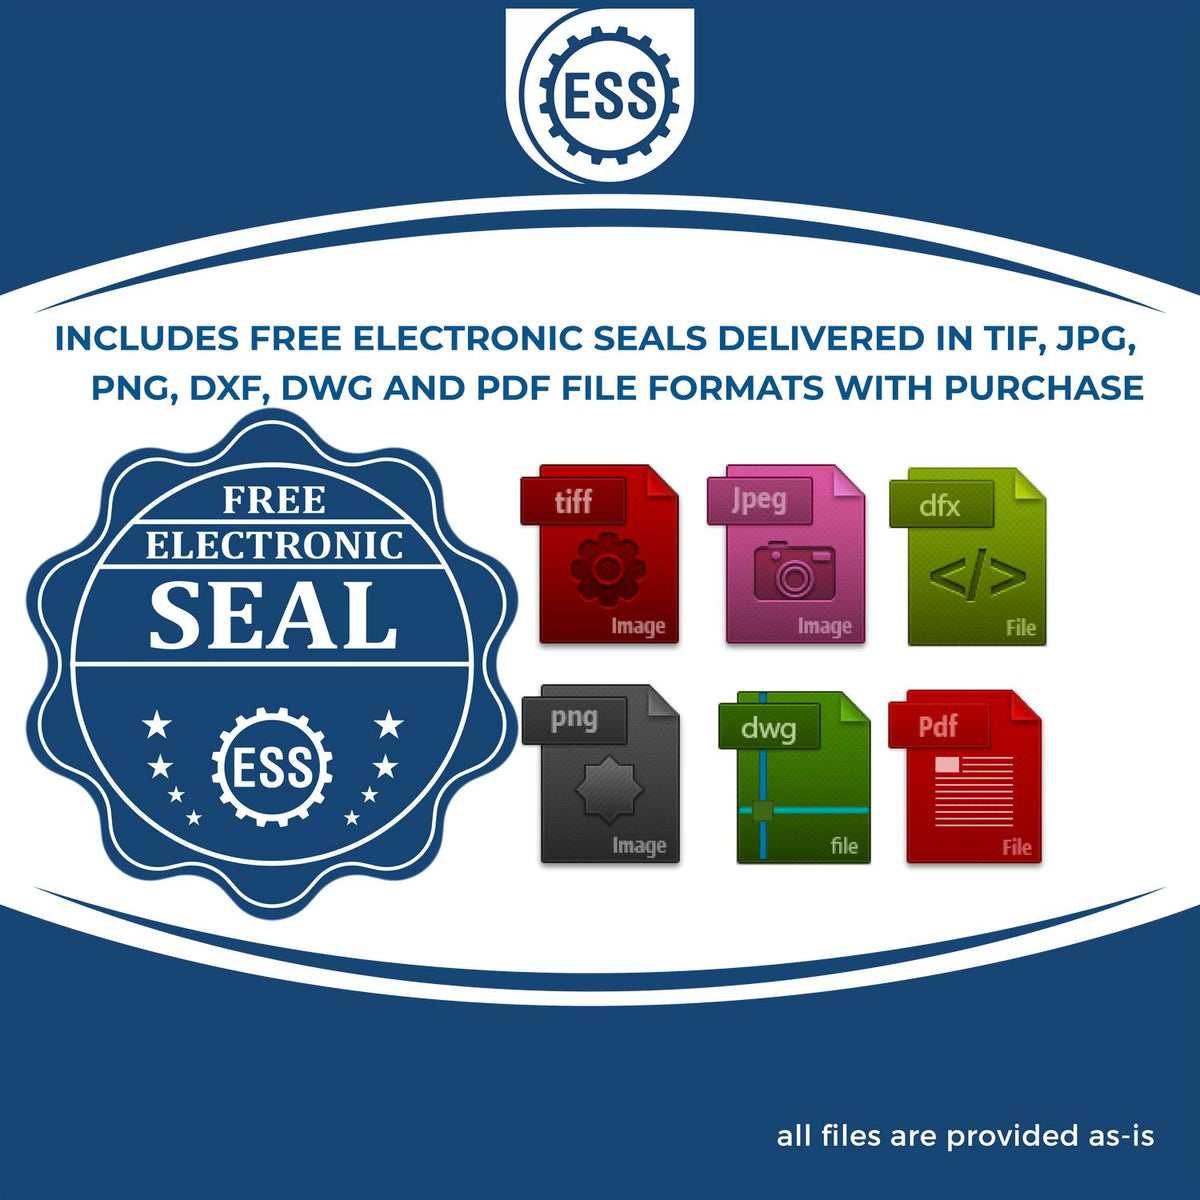 An infographic for the free electronic seal for the Hybrid Louisiana Architect Seal illustrating the different file type icons such as DXF, DWG, TIF, JPG and PNG.